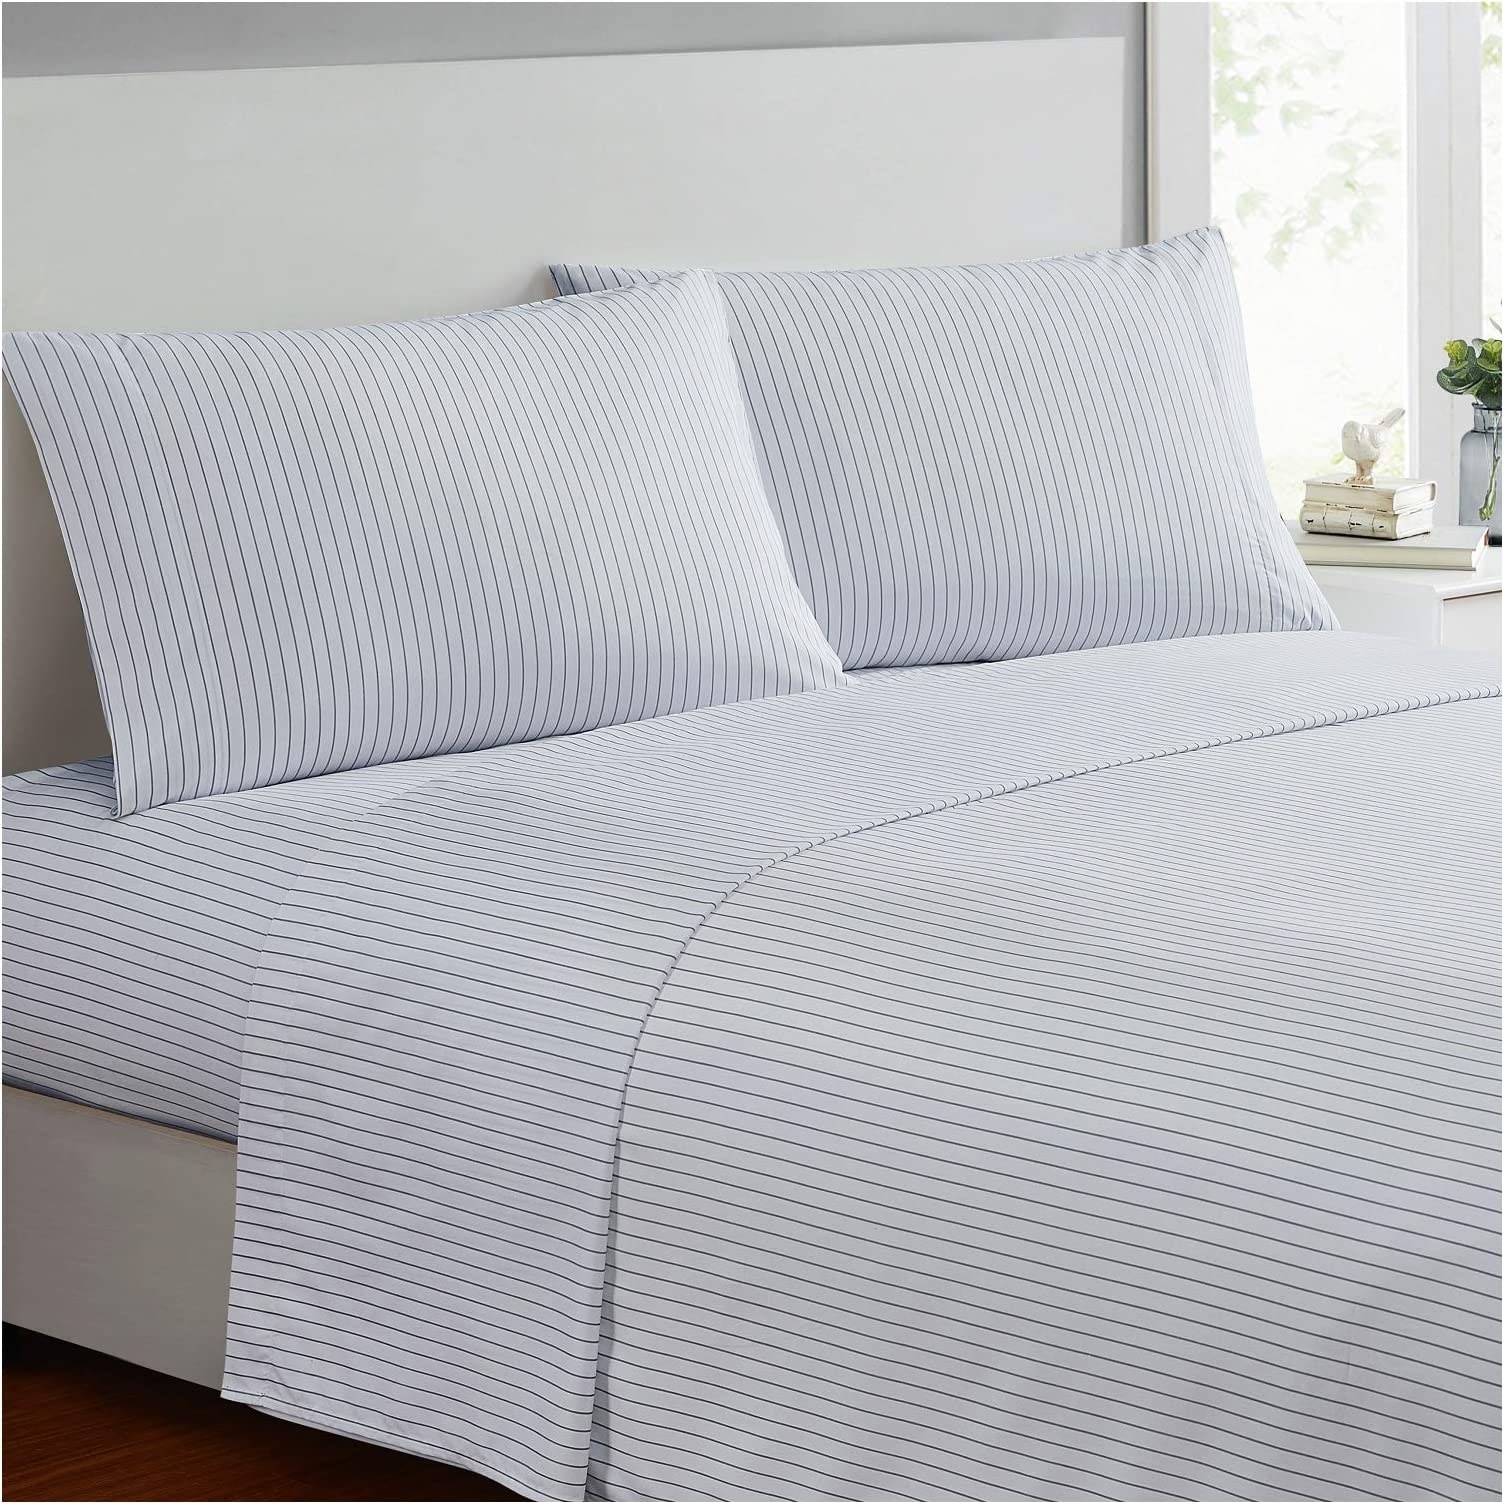 the sheets in white with thin navy stripes